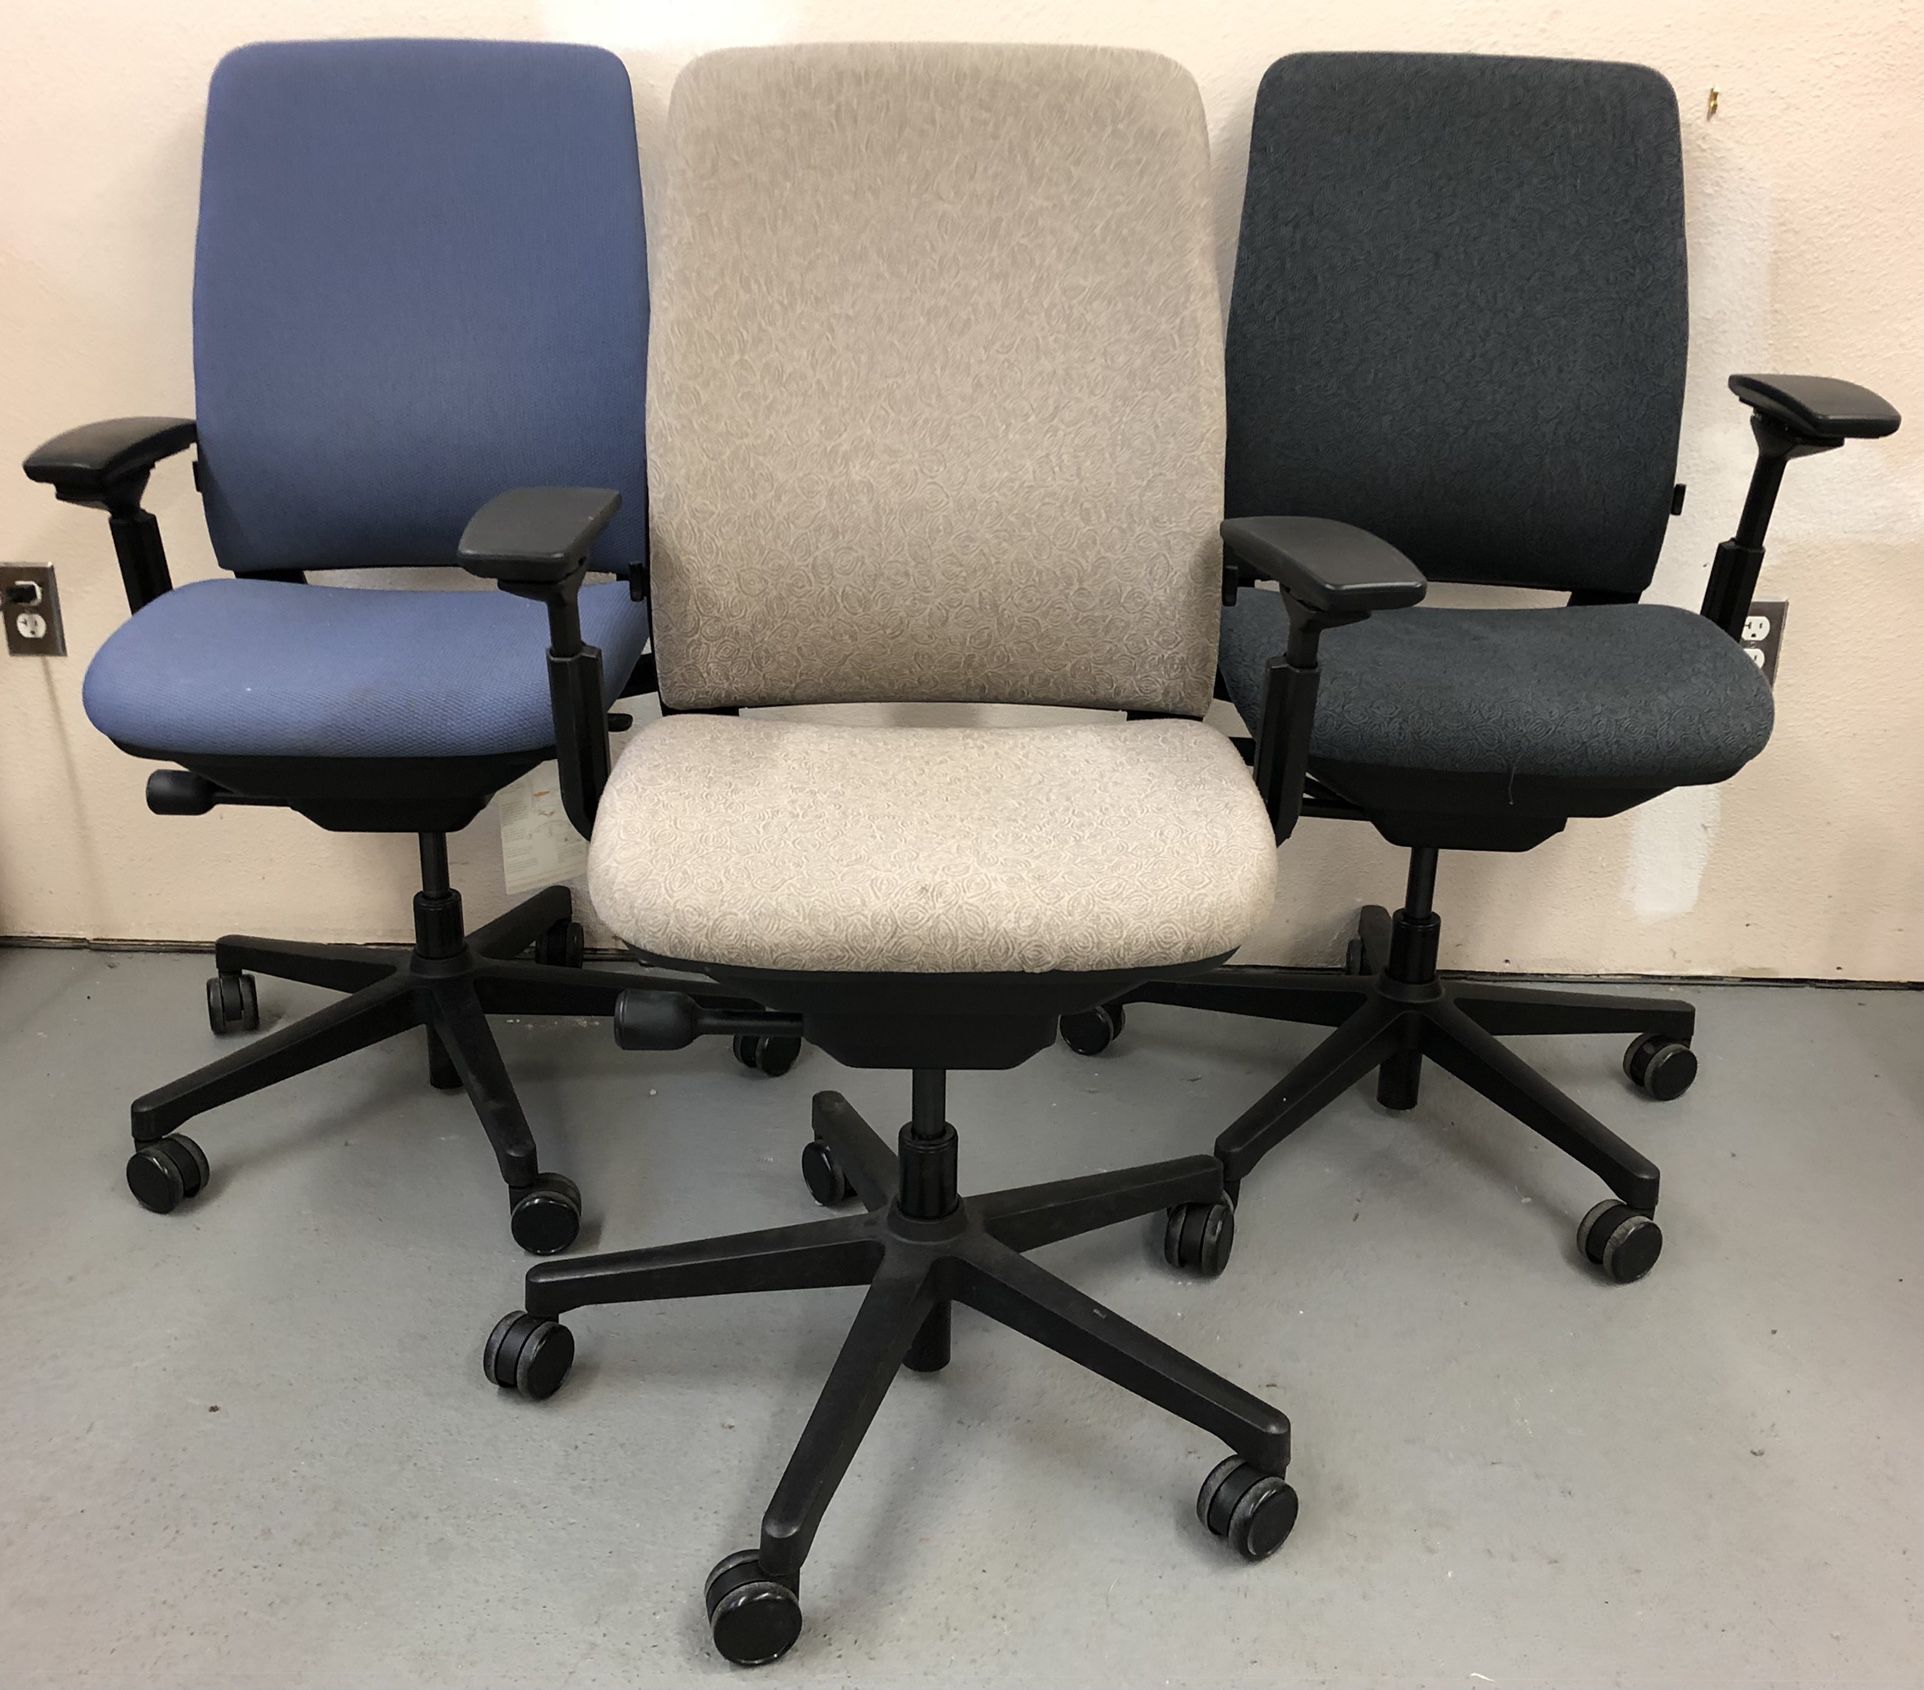 Steelcase Amia Adjustable Desk Chair 6 Chairs 225 Each